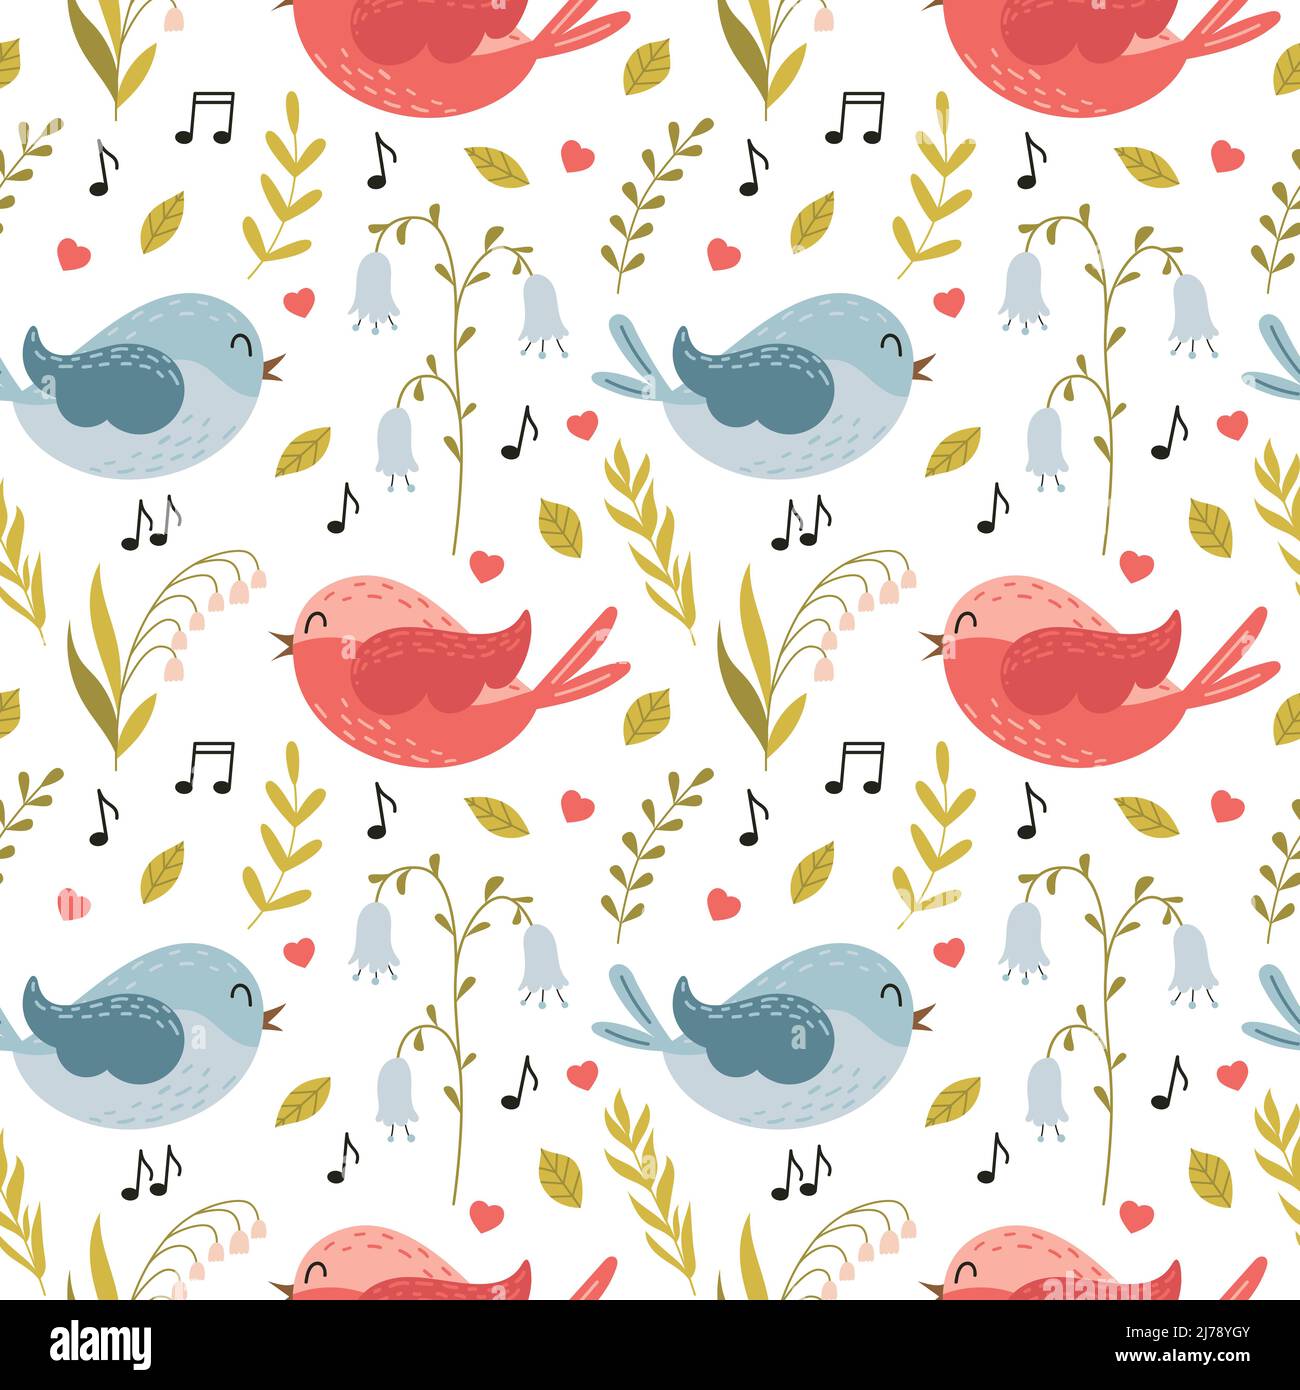 Seamless pattern with cute cartoon flying singing birds and spring flowers, lily of the valley, bluebell, herbs and twigs. For baby textiles. Color ve Stock Vector